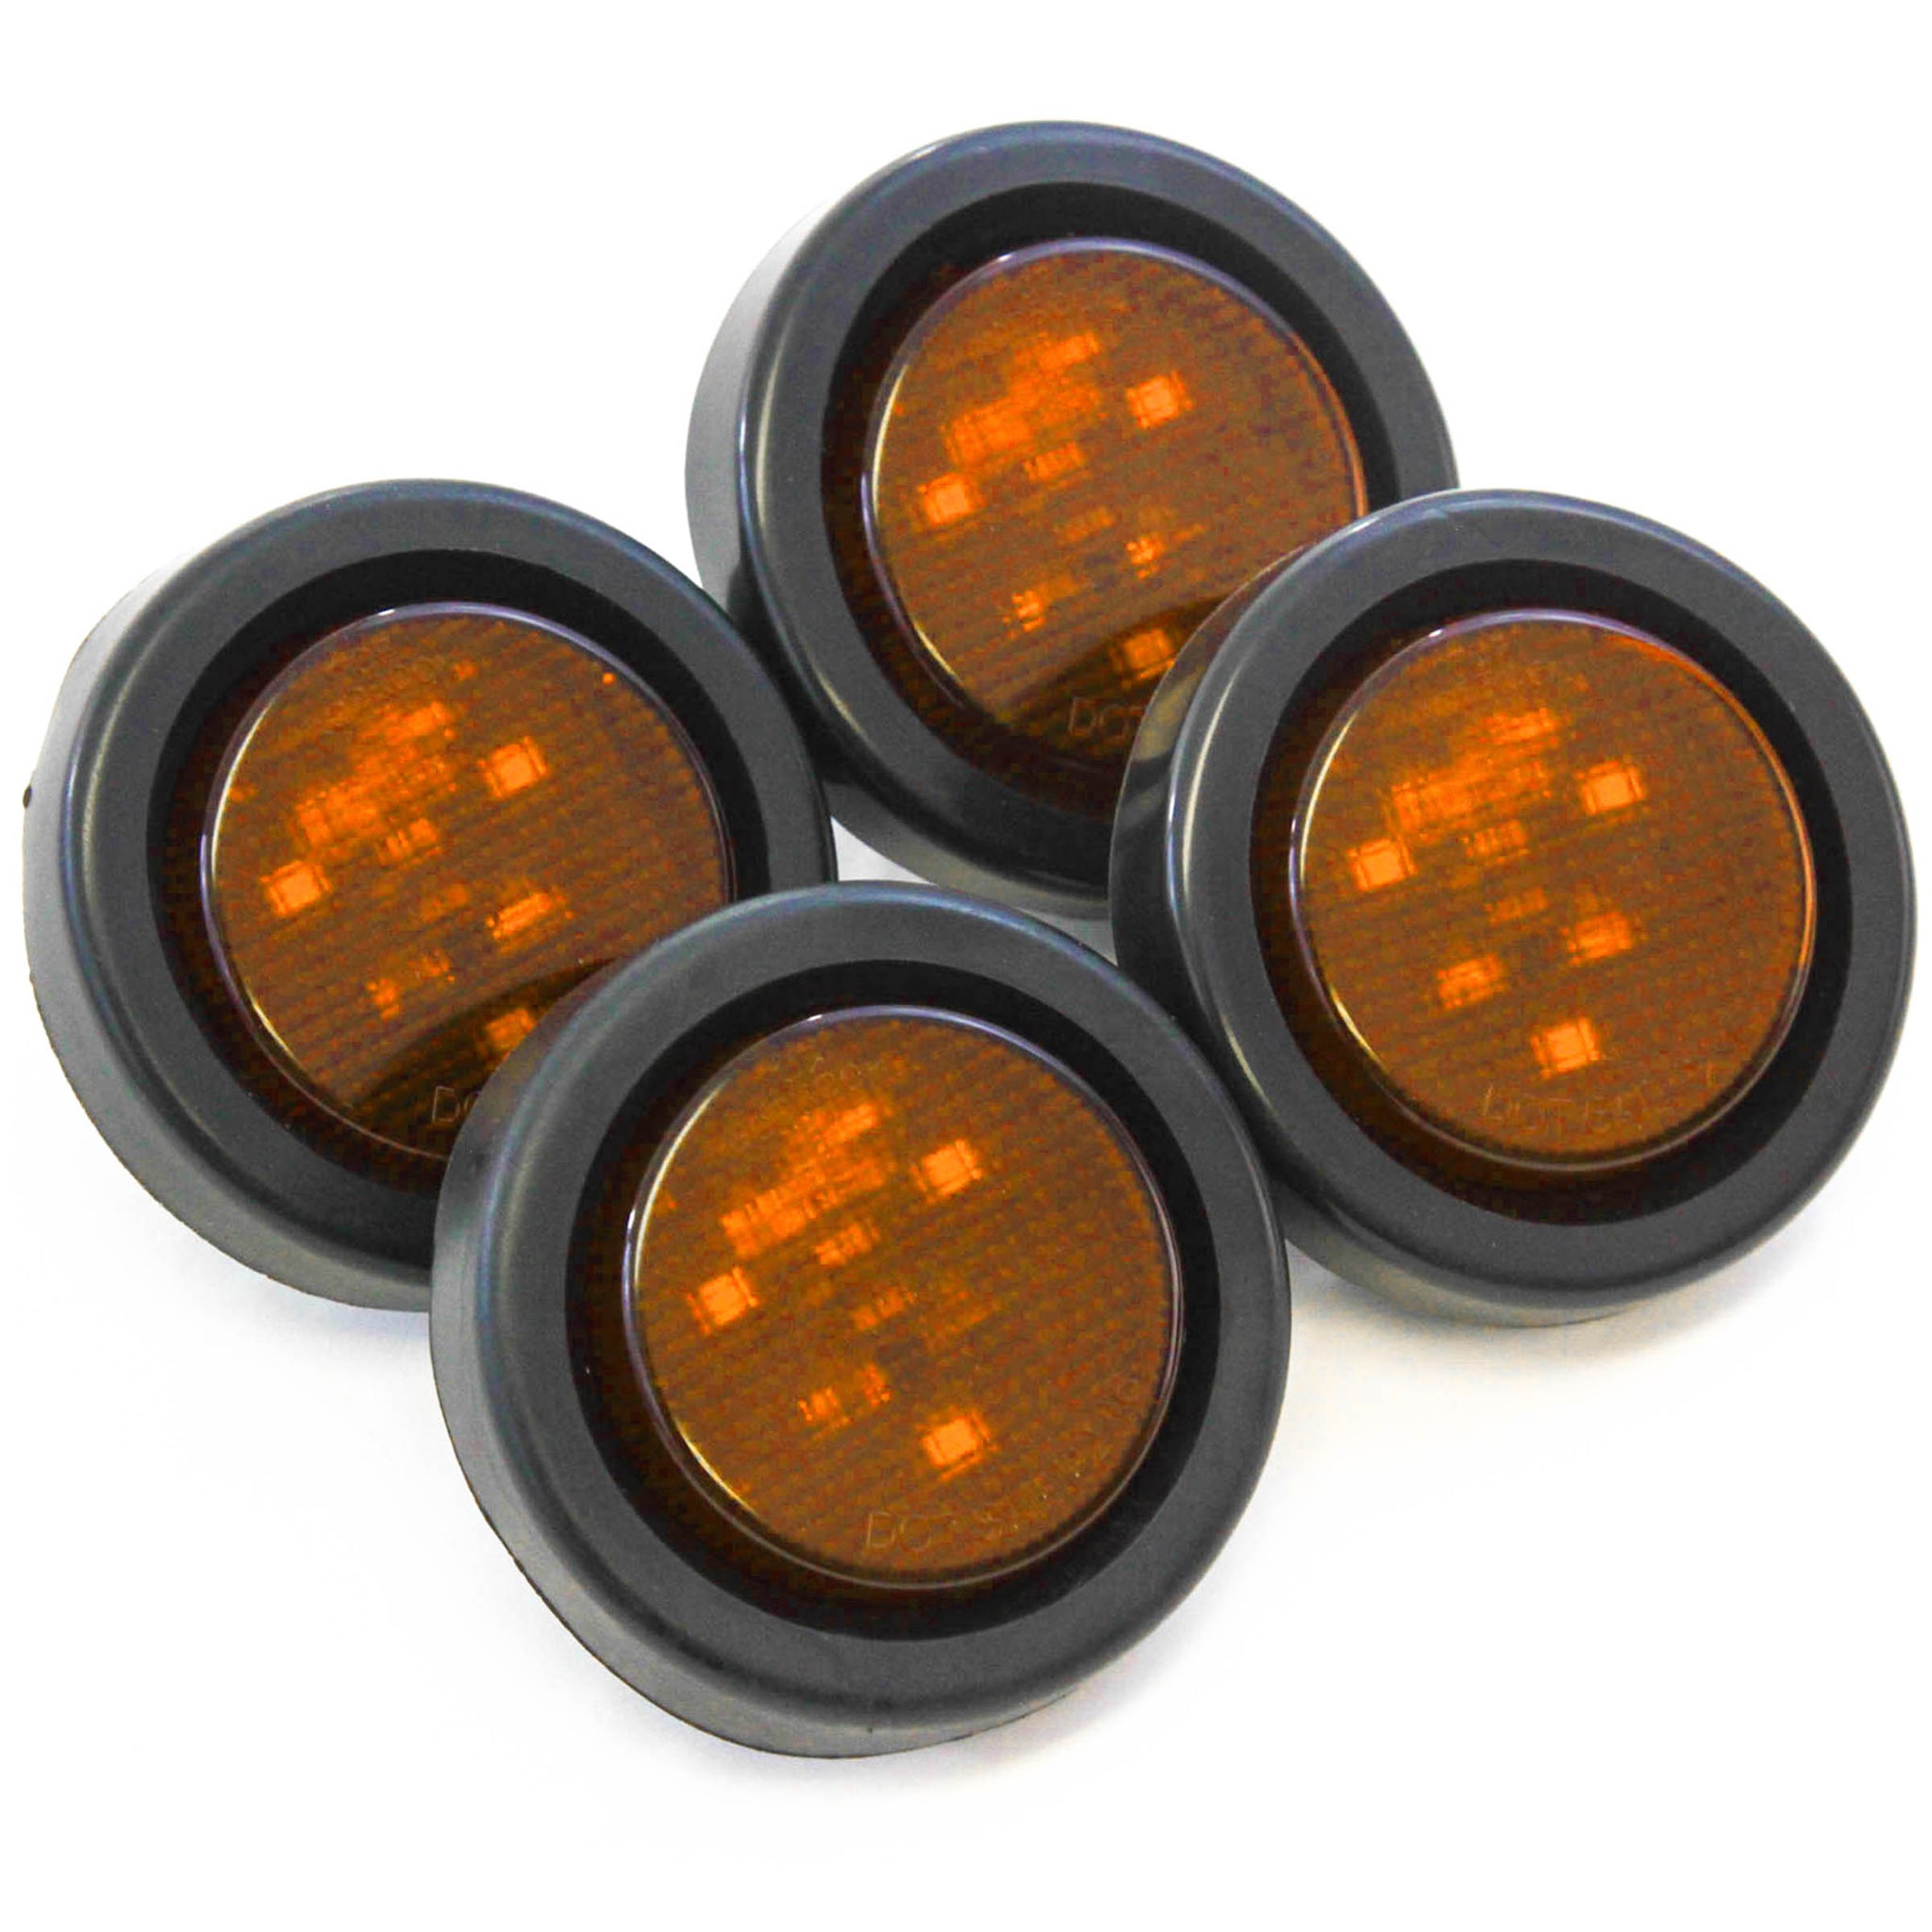 Red Hound Auto (4) Amber LED 2 Inches Round Side Marker Light Kits with Grommet Truck Trailer RV